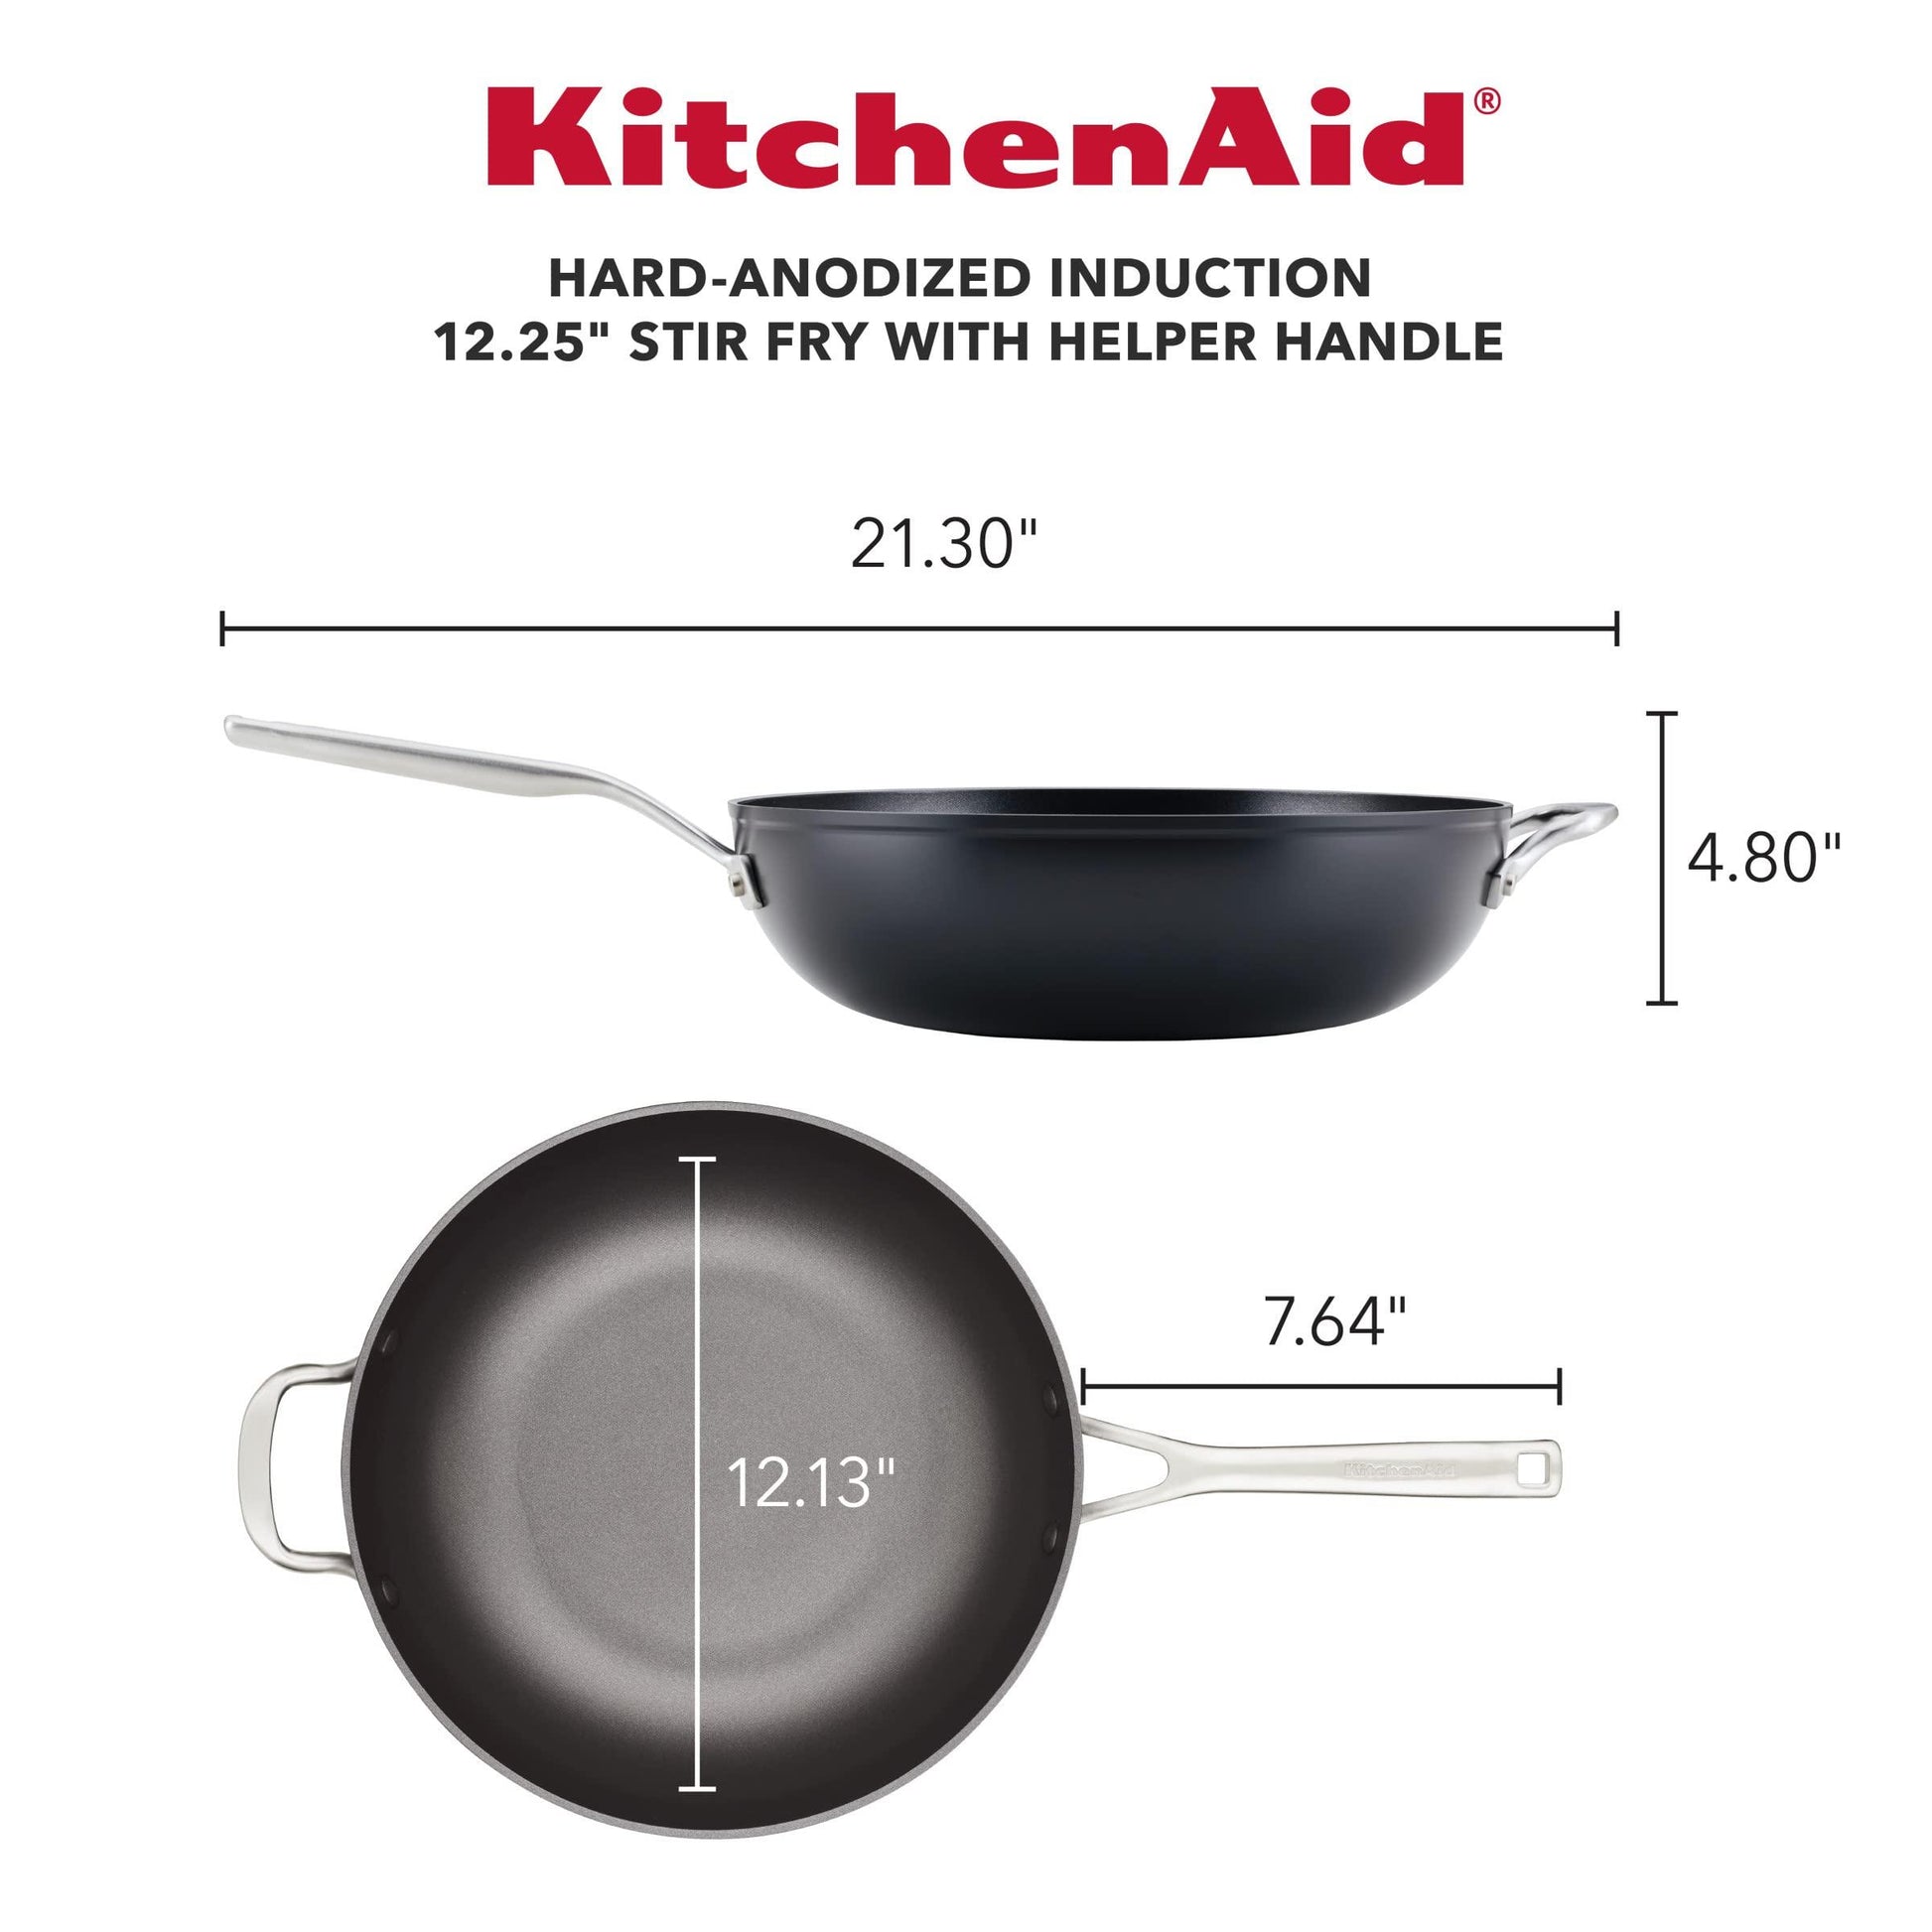 KitchenAid Hard Anodized Induction Nonstick Stir Fry Pan/Wok with Helper Handle, 12.25 Inch, Matte Black - CookCave